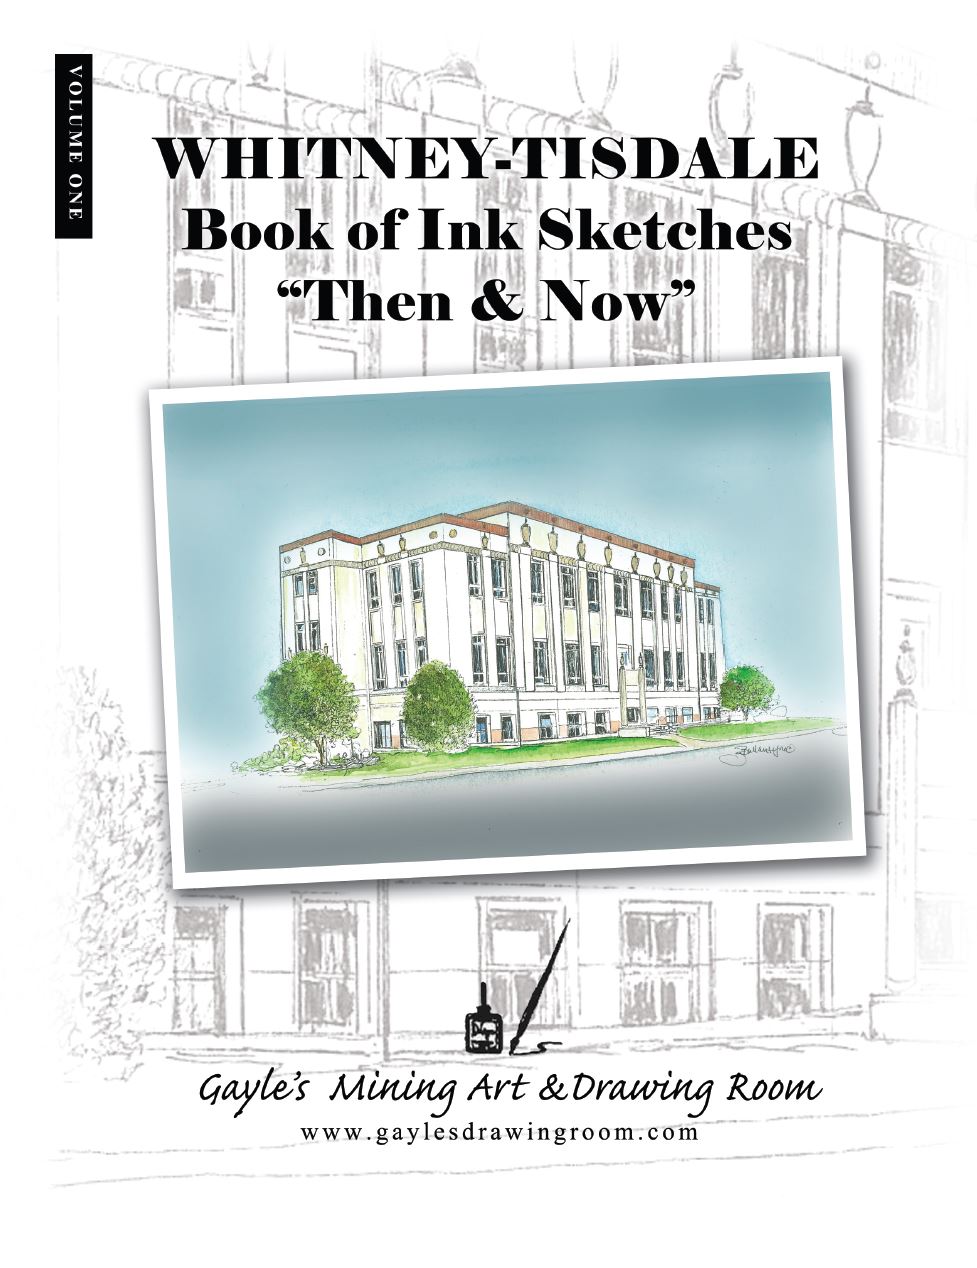 Whitney-Tisdale: Ink Sketch Book